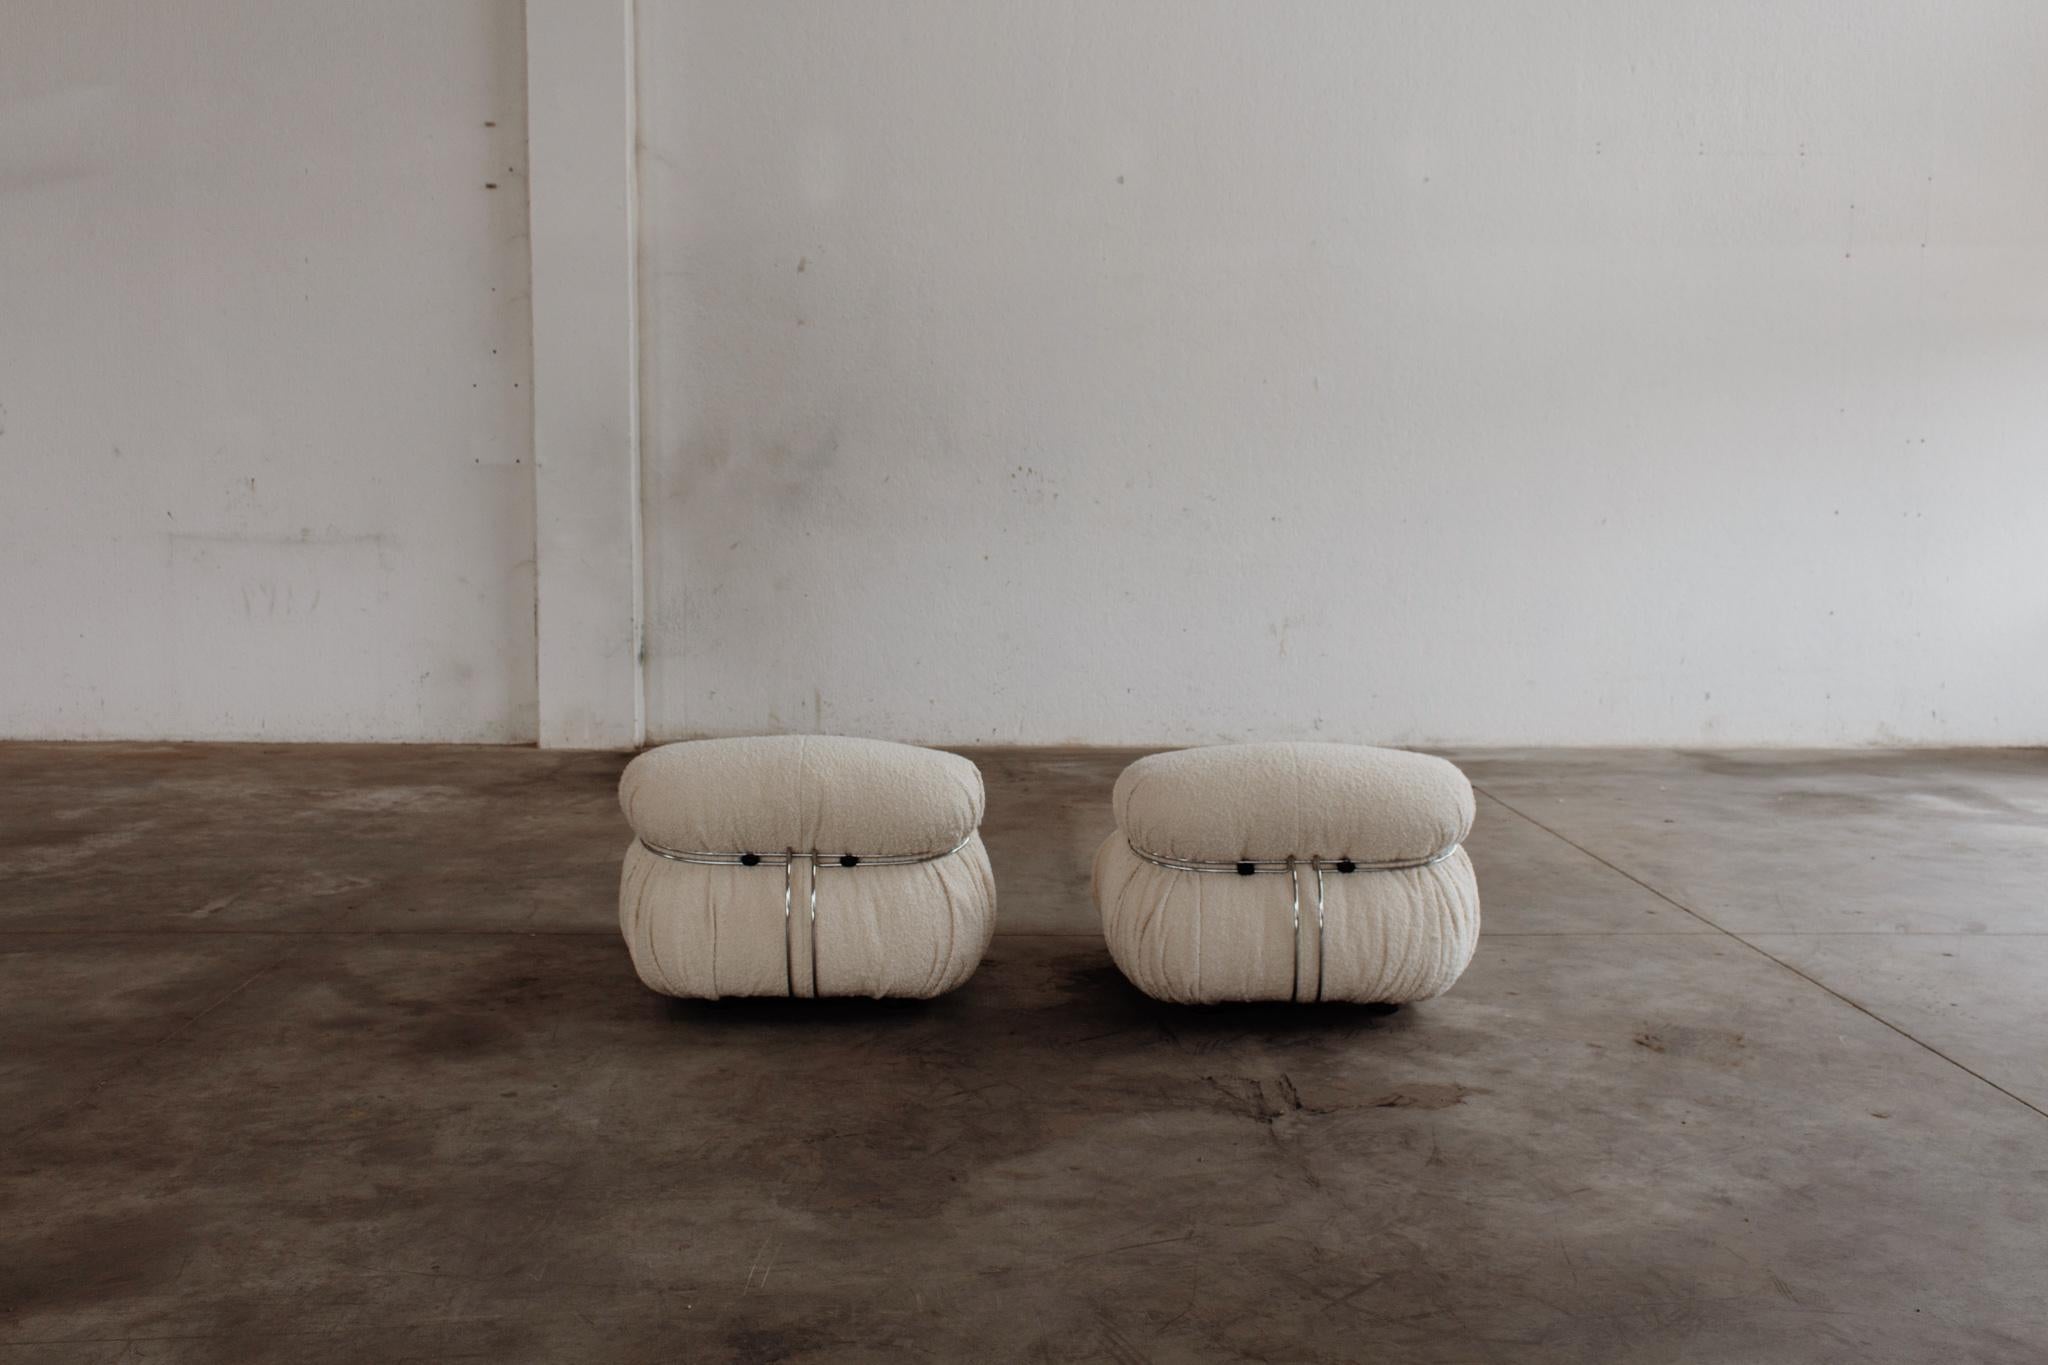 Afra & Tobia Scarpa “Soriana” Chairs for Cassina, Bouclé Wool, 1969, Set of 2 For Sale 6